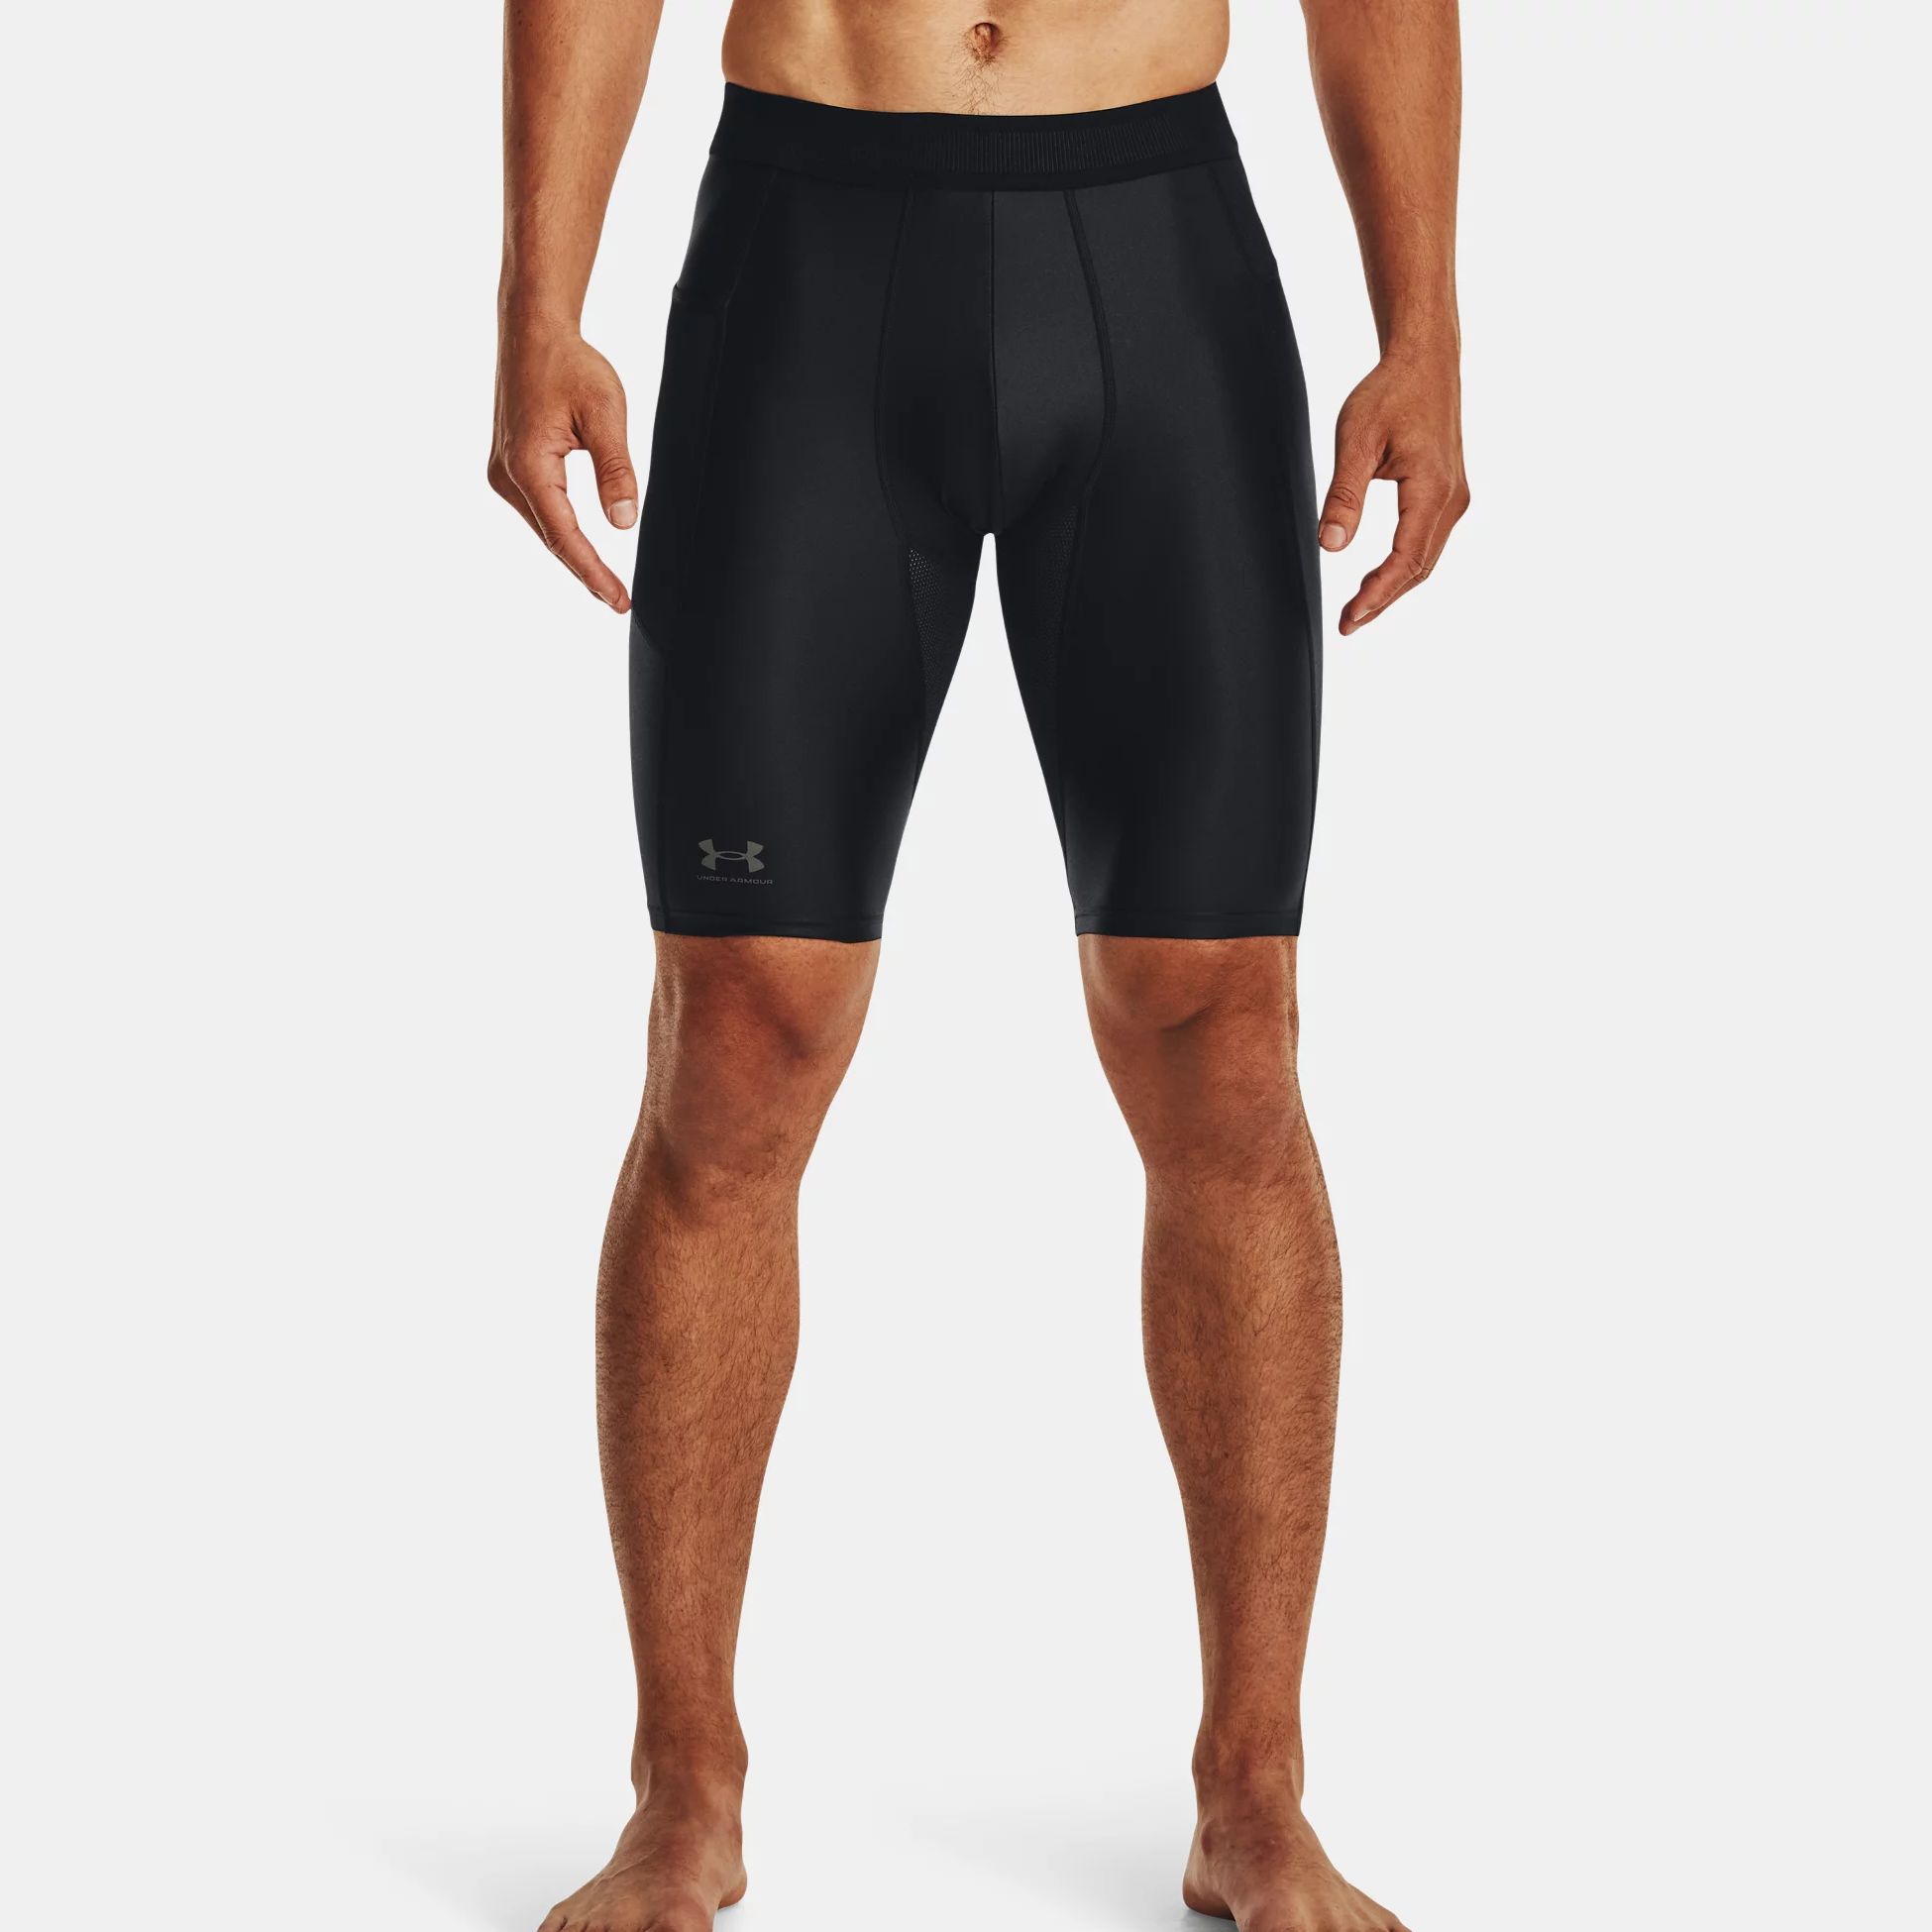 https://img1.sportconcept.com/backend_nou/content/images/fitness-under-armour%20ua-iso-chill-compression-long-shorts-20220907165953.jpg